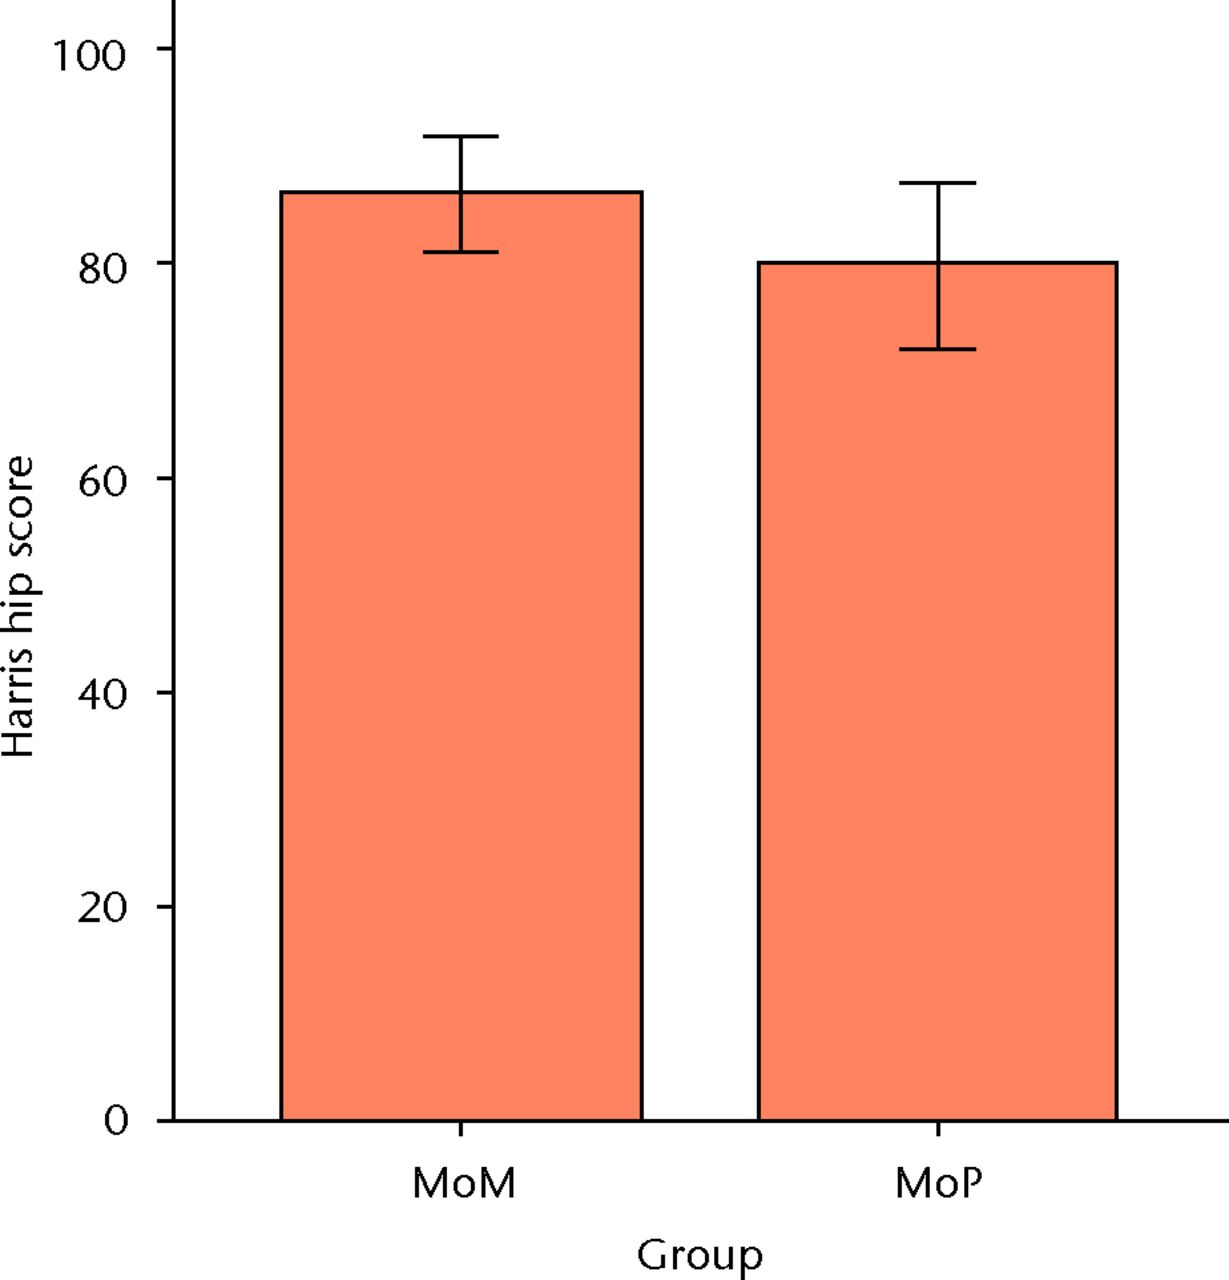 Figs. 3a - 3d 
          Graphs showing the outcome
at two years in the metal-on-metal (MoM) and metal-on-polyethylene
(MoP) groups. Figure 3a – boxplots showing the mean University of
California, Los Angeles (UCLA) activity score. The boxes represent
the mean and interquartile range (IQR) and the whiskers denote the
range of data. Figure 3b – histogram showing the mean Western Ontario and
McMaster Universities (WOMAC) osteoarthritis index by total score
and subscore. The error bars denote the standard deviation. Figure
3c – boxplots showing the mean Harris hip score. The boxes represent the
mean and IQR and the whiskers denote the range of data. Figure 3d
– histogram showing the mean RAND-36 score by different parameter. The
error bars denote the standard deviation.
        